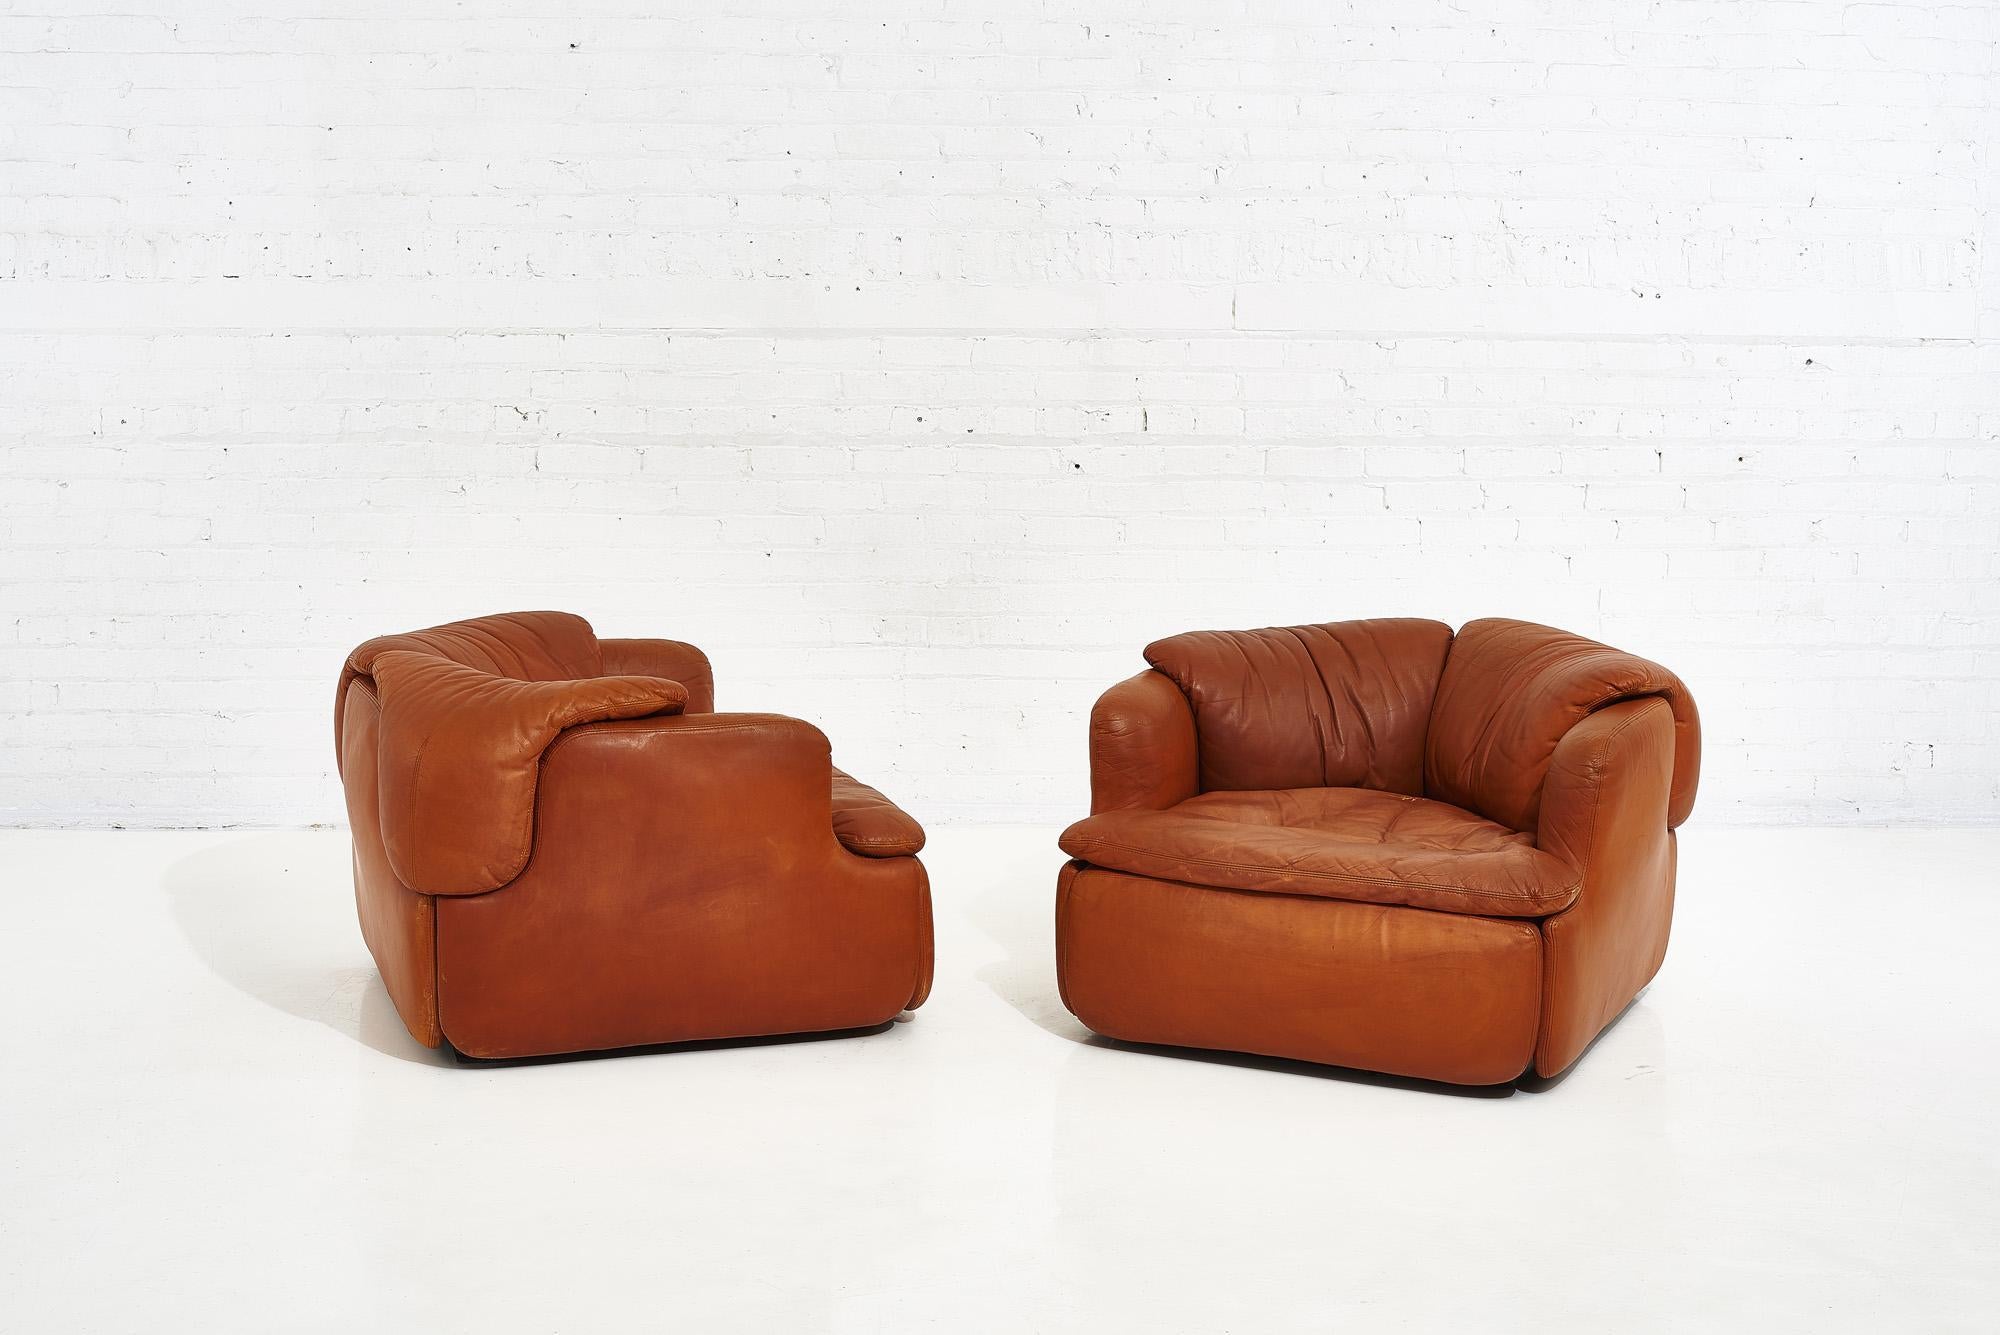 Late 20th Century Alberto Rosselli for Saporiti Brown Leather “Confidential” Lounge Chairs